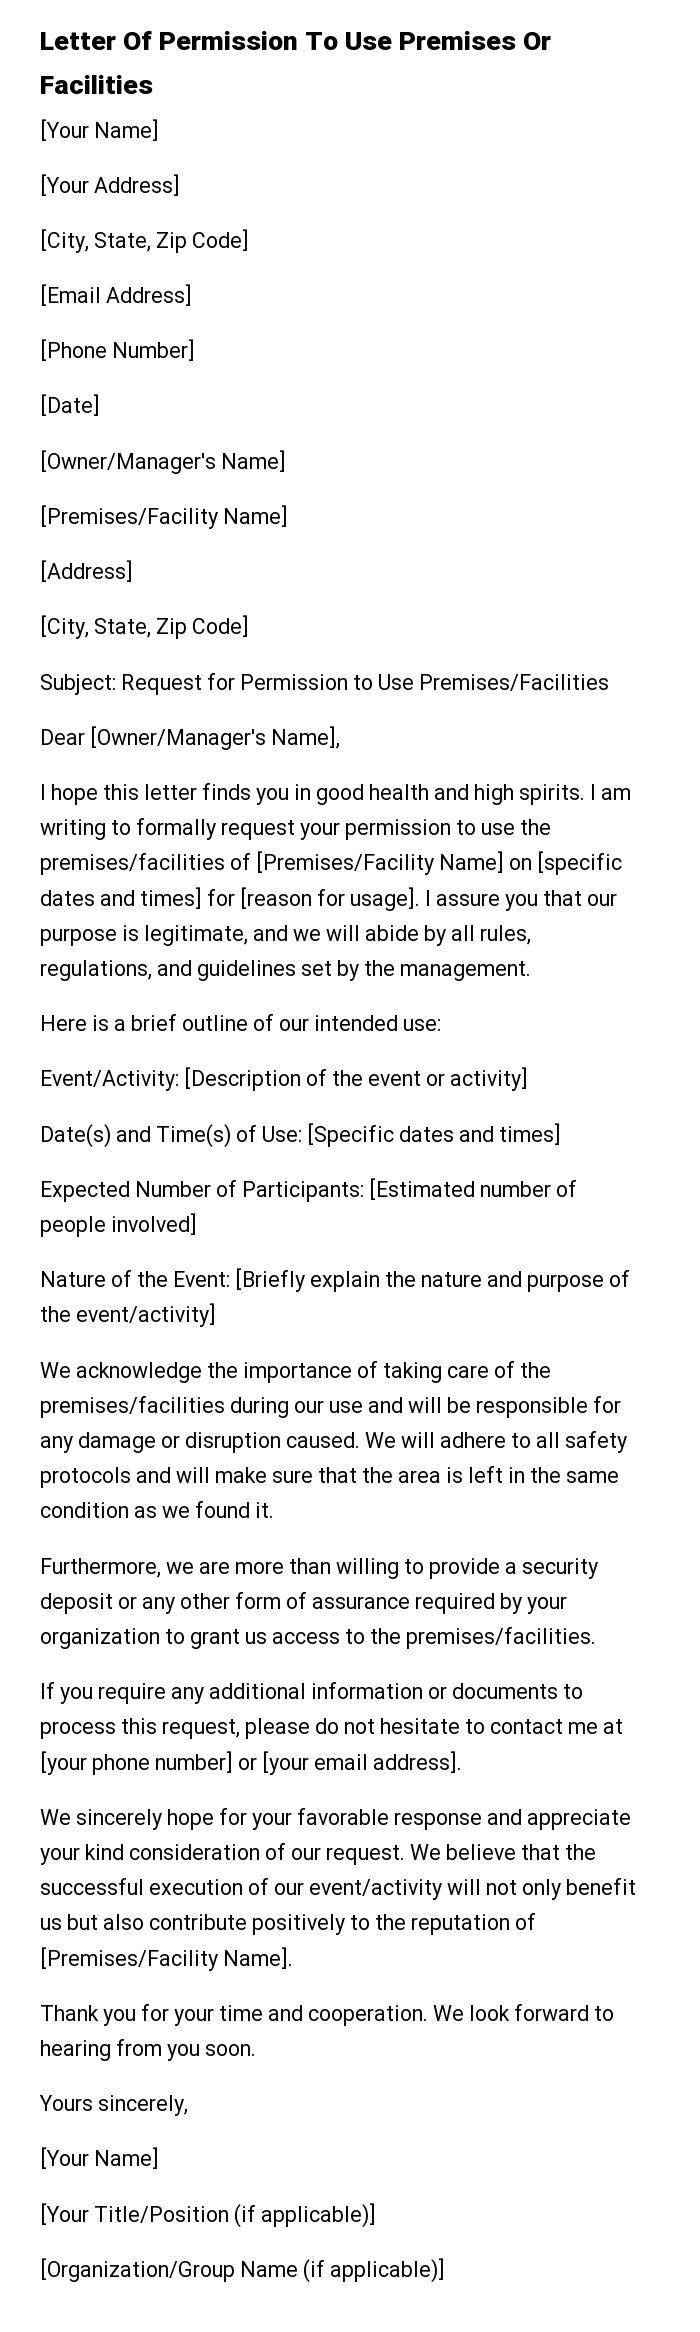 Letter Of Permission To Use Premises Or Facilities